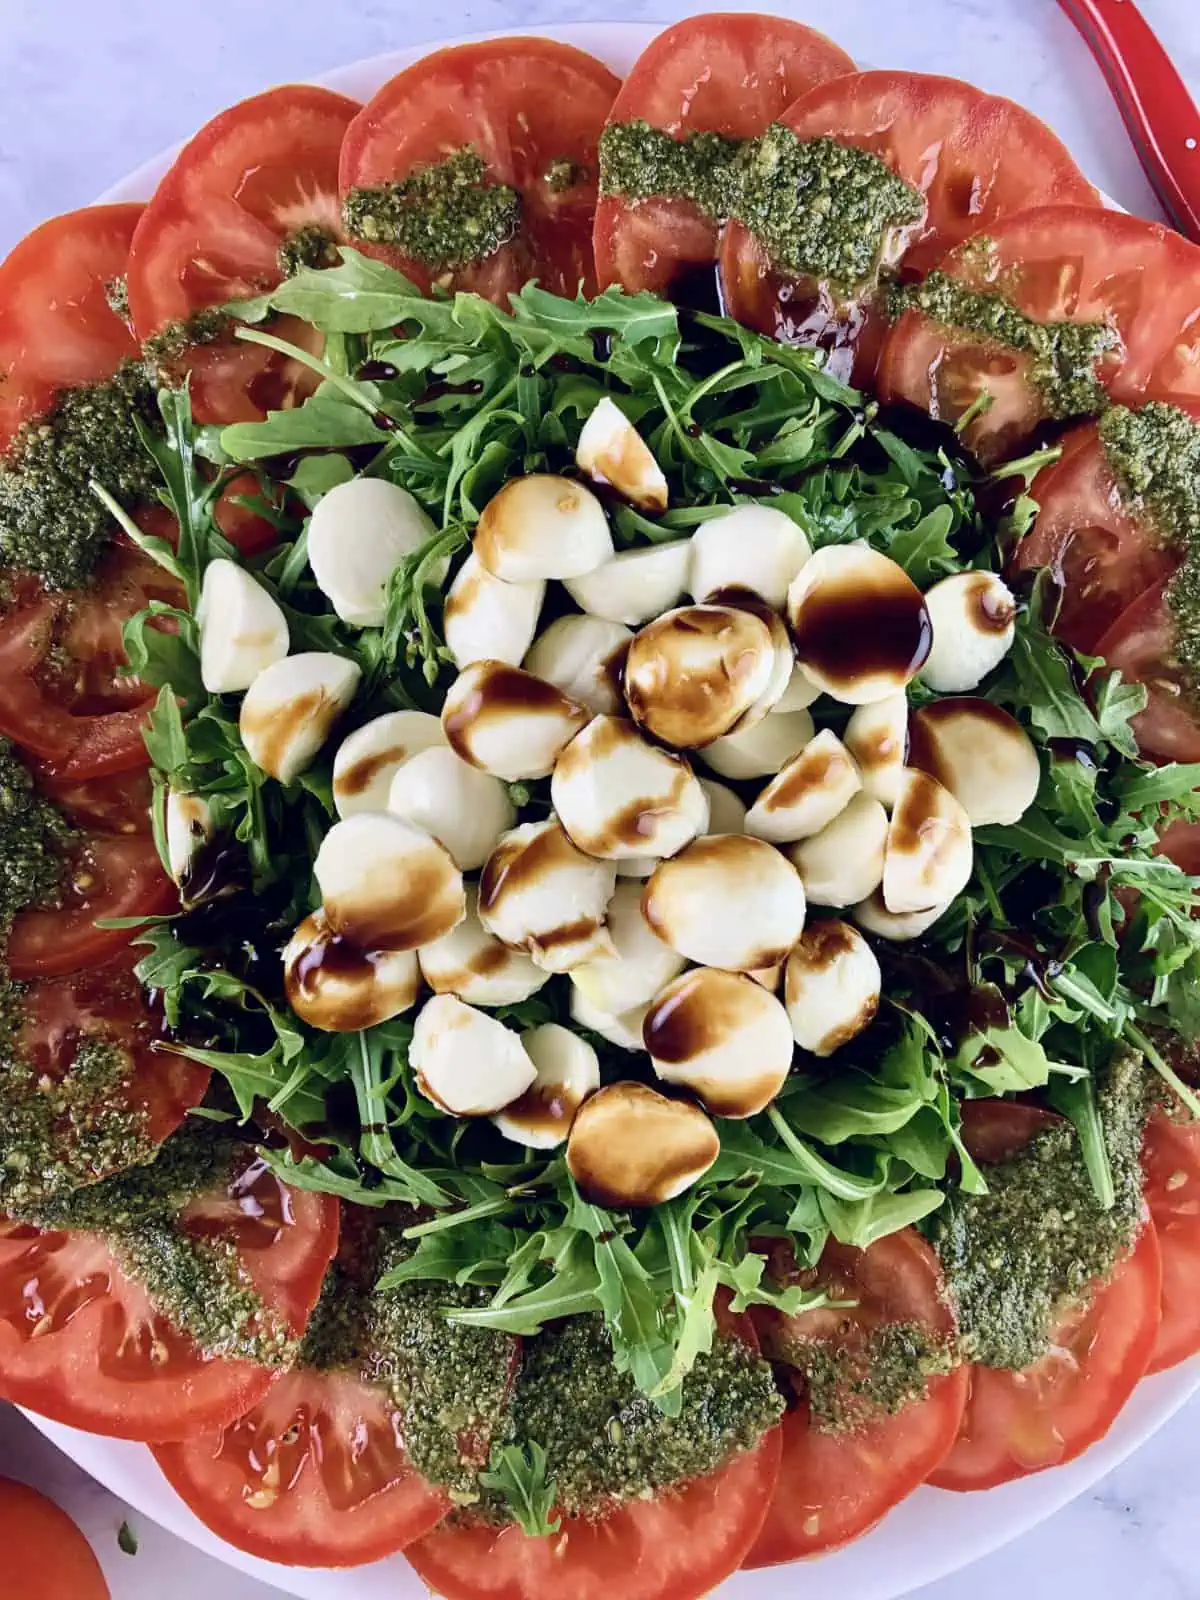 A close of tomato mozzarella salad with rocket or arugula drizzled with balsamic.